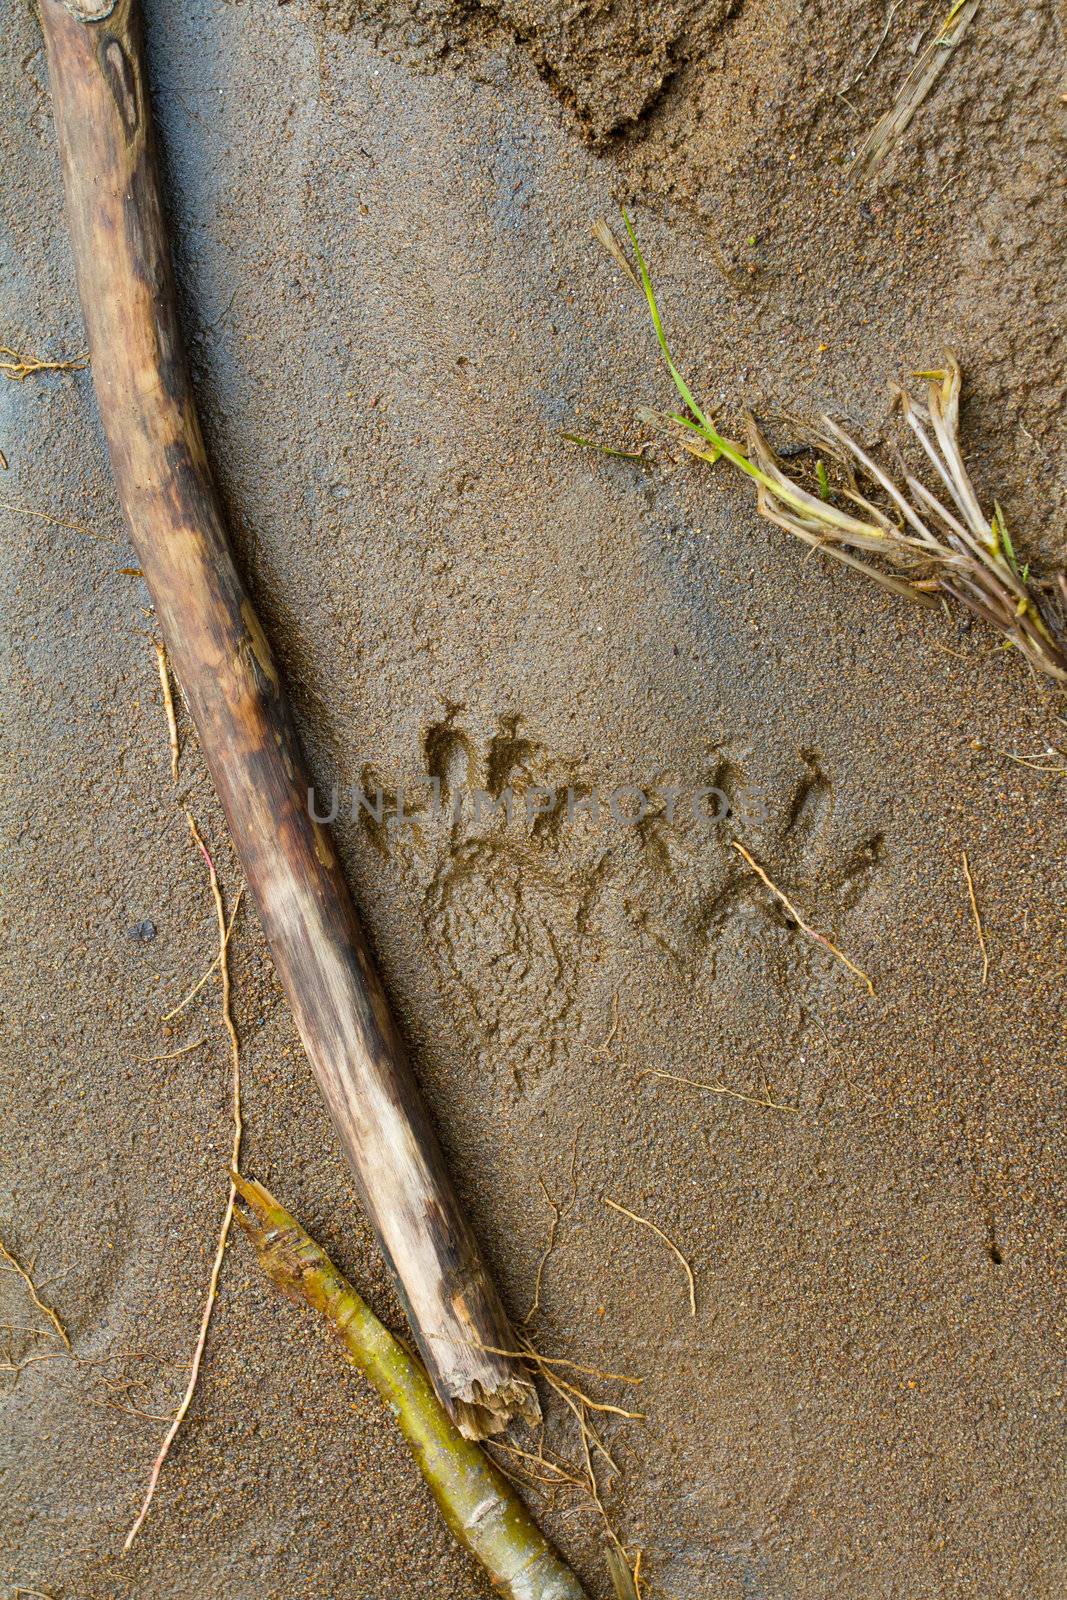 Footprints of a racoon on the river bank at and Oregon river during the winter.